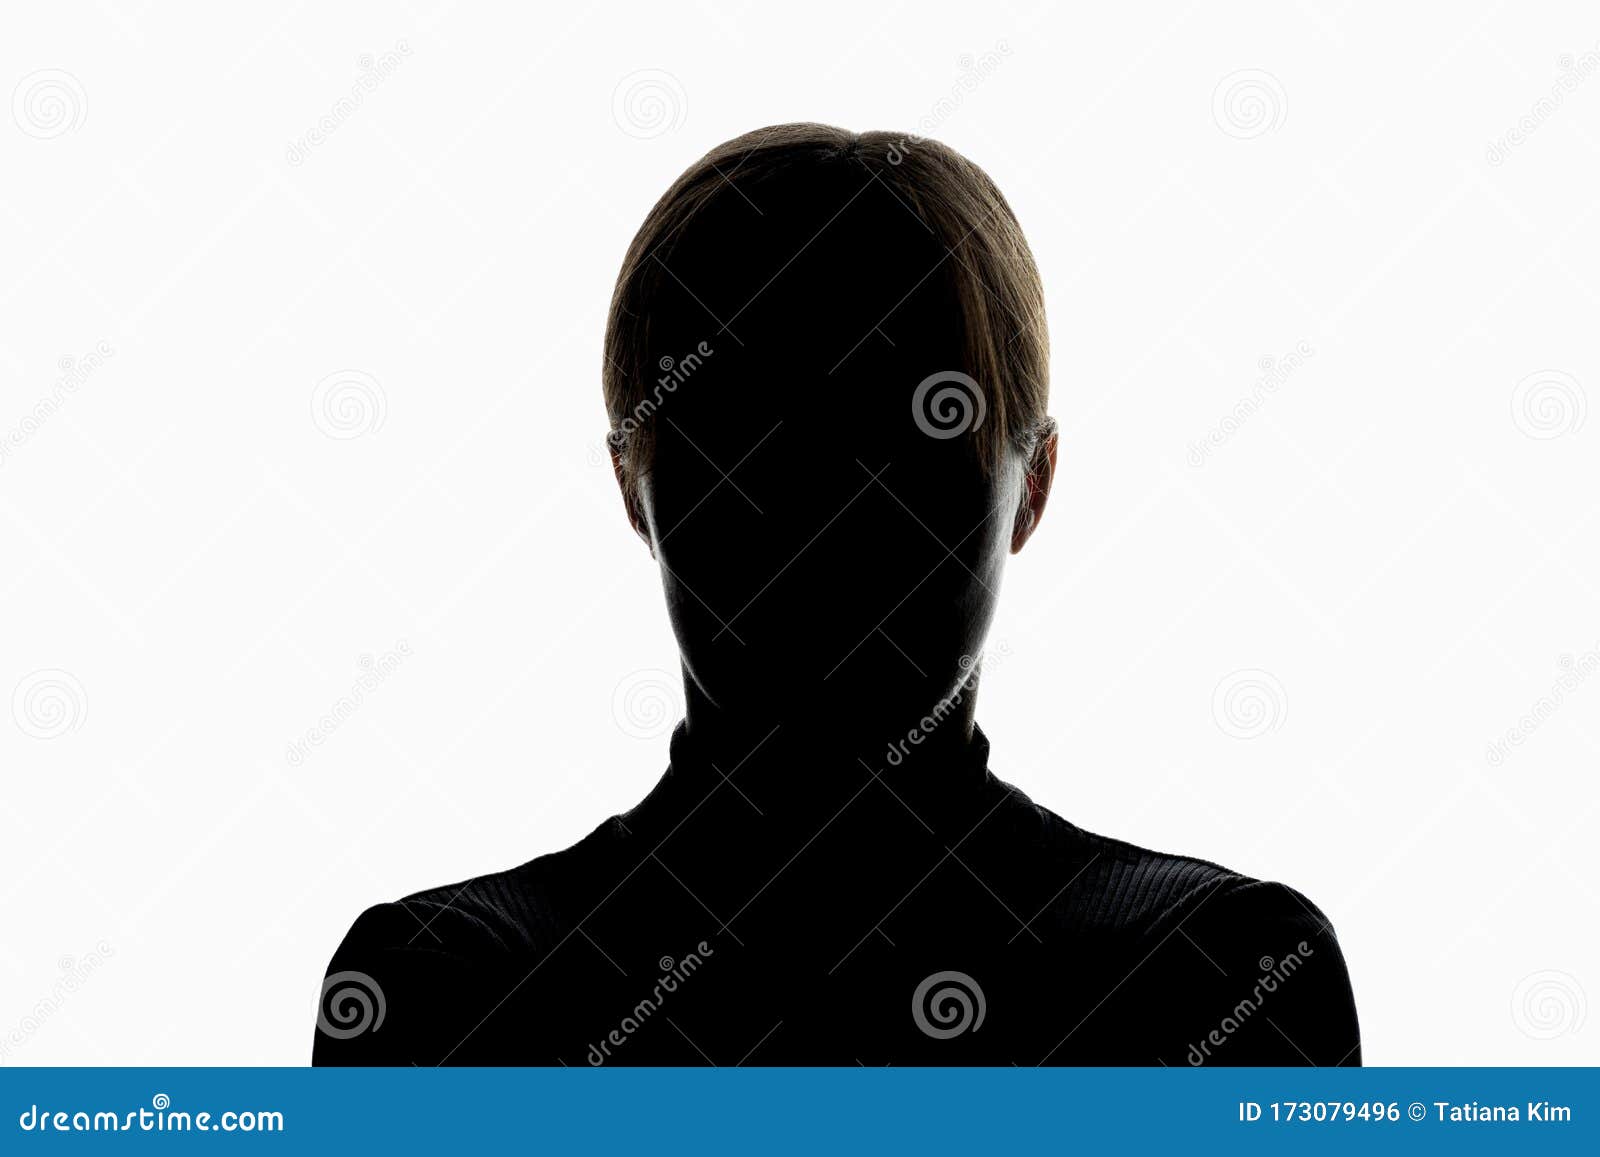 dark silhouette of girl  on white background, the concept of anonymity